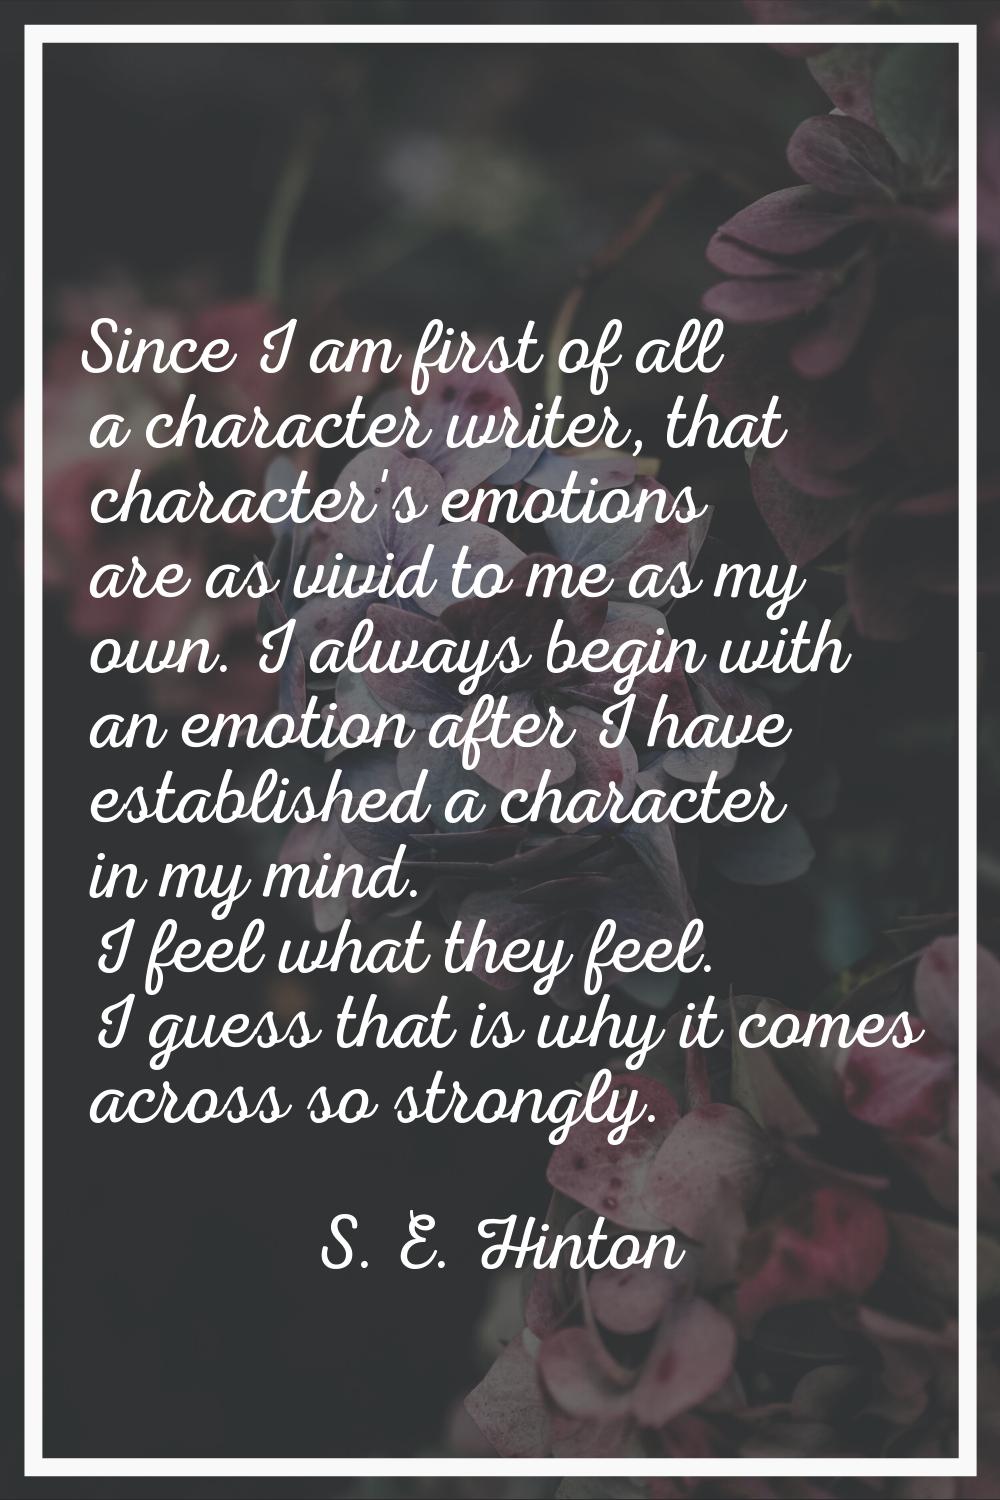 Since I am first of all a character writer, that character's emotions are as vivid to me as my own.